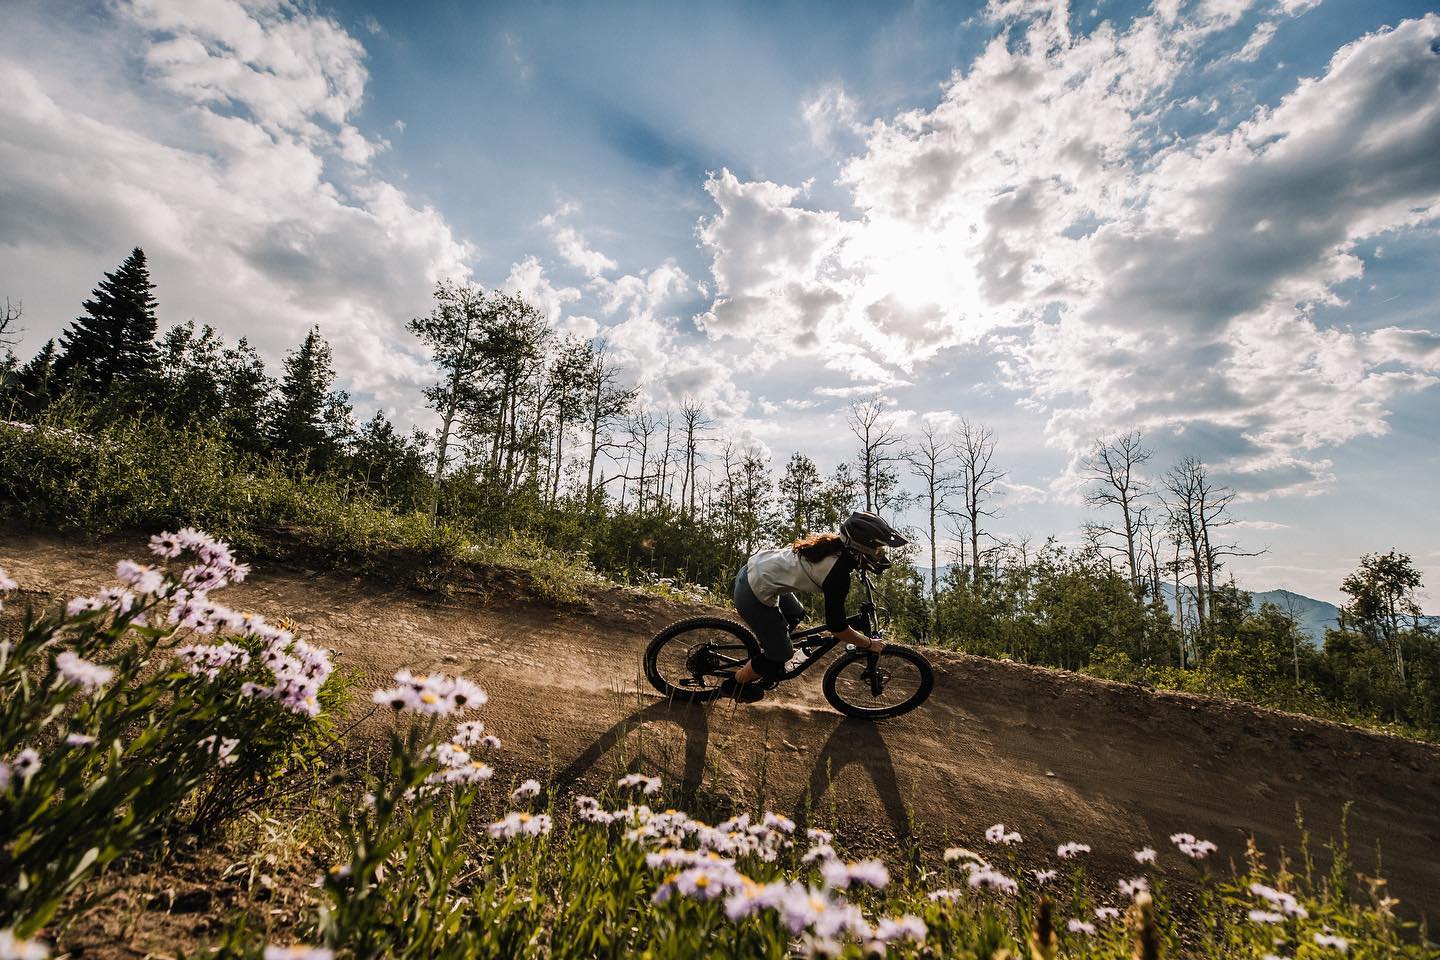 Biker on trail with wildflowers in foreground